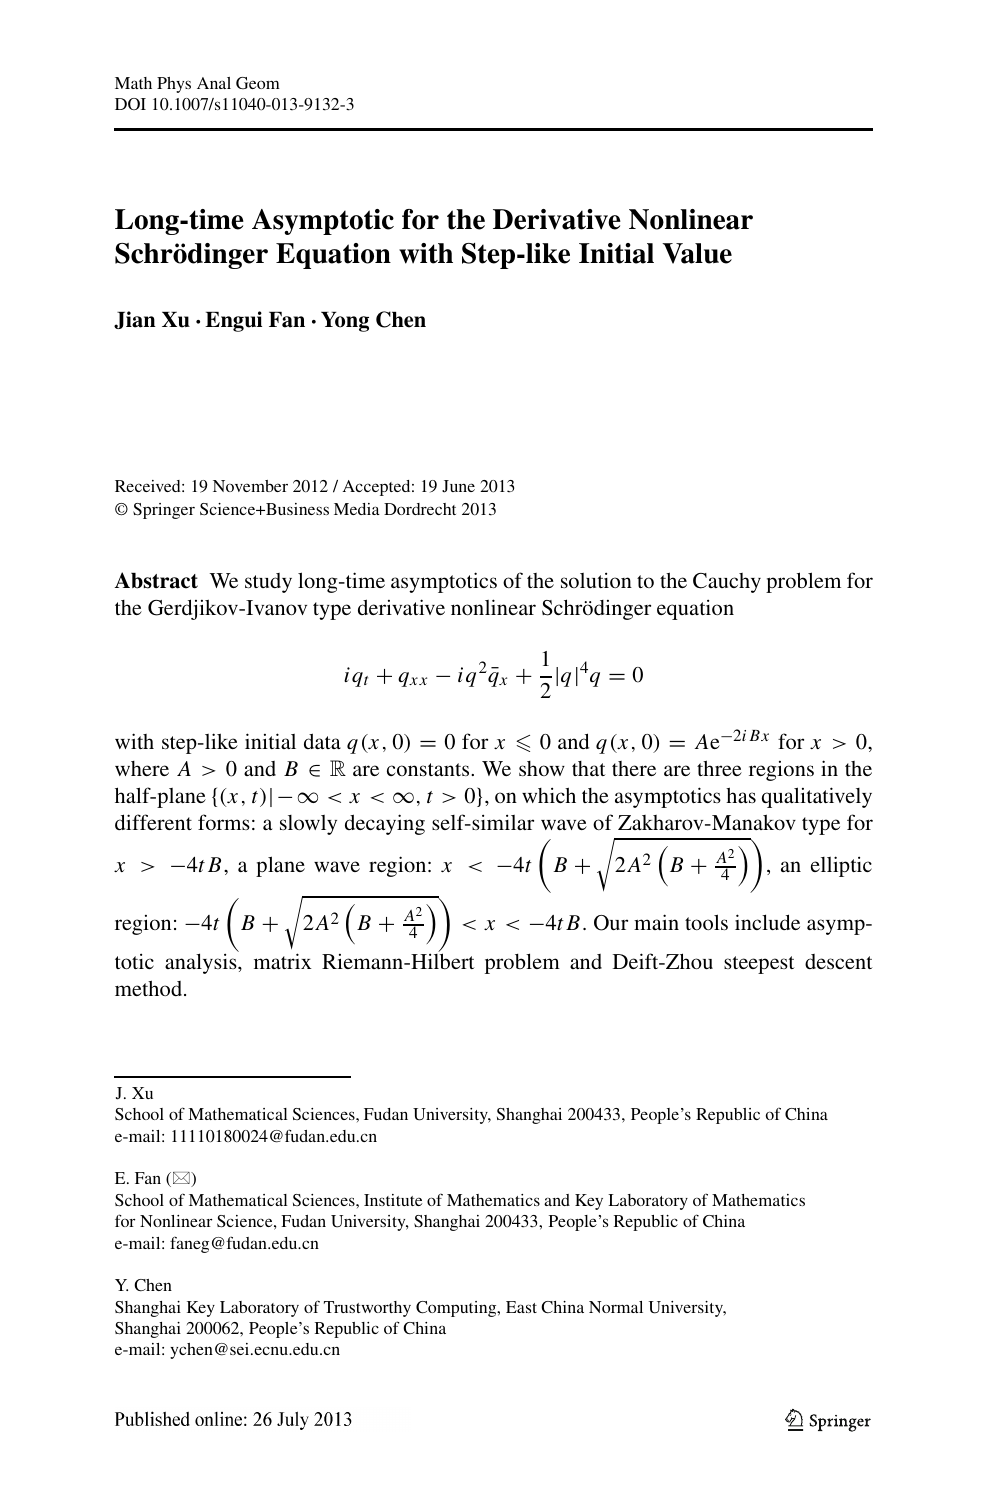 Long Time Asymptotic For The Derivative Nonlinear Schrodinger Equation With Step Like Initial Value Topic Of Research Paper In Mathematics Download Scholarly Article Pdf And Read For Free On Cyberleninka Open Science Hub